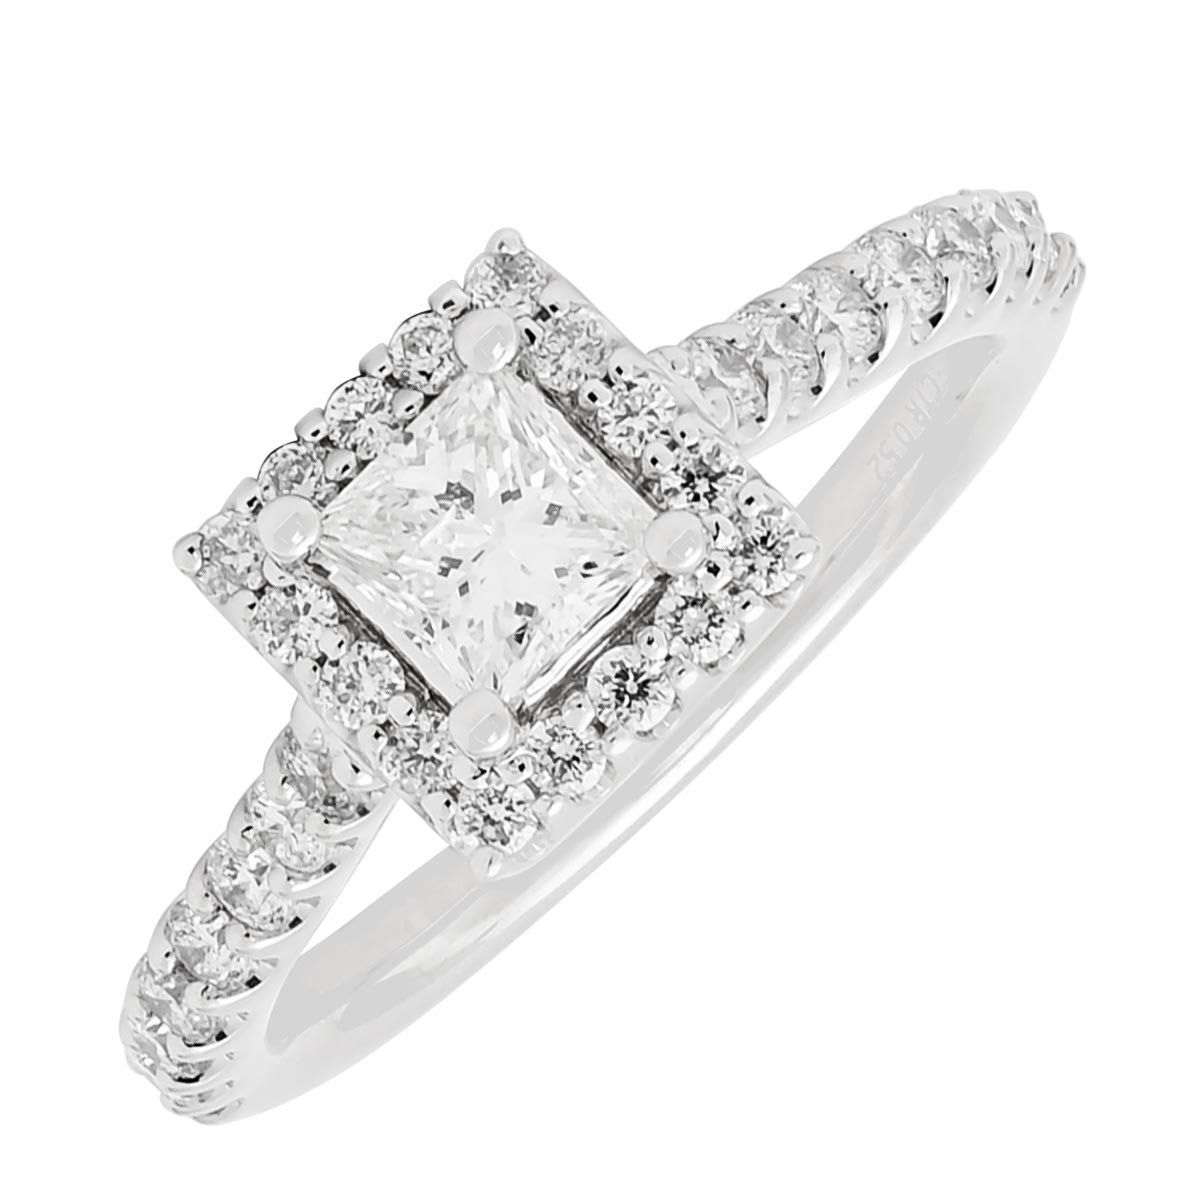 Princess Cut Diamond Halo Engagement Ring in 14kt White Gold (1ct tw)